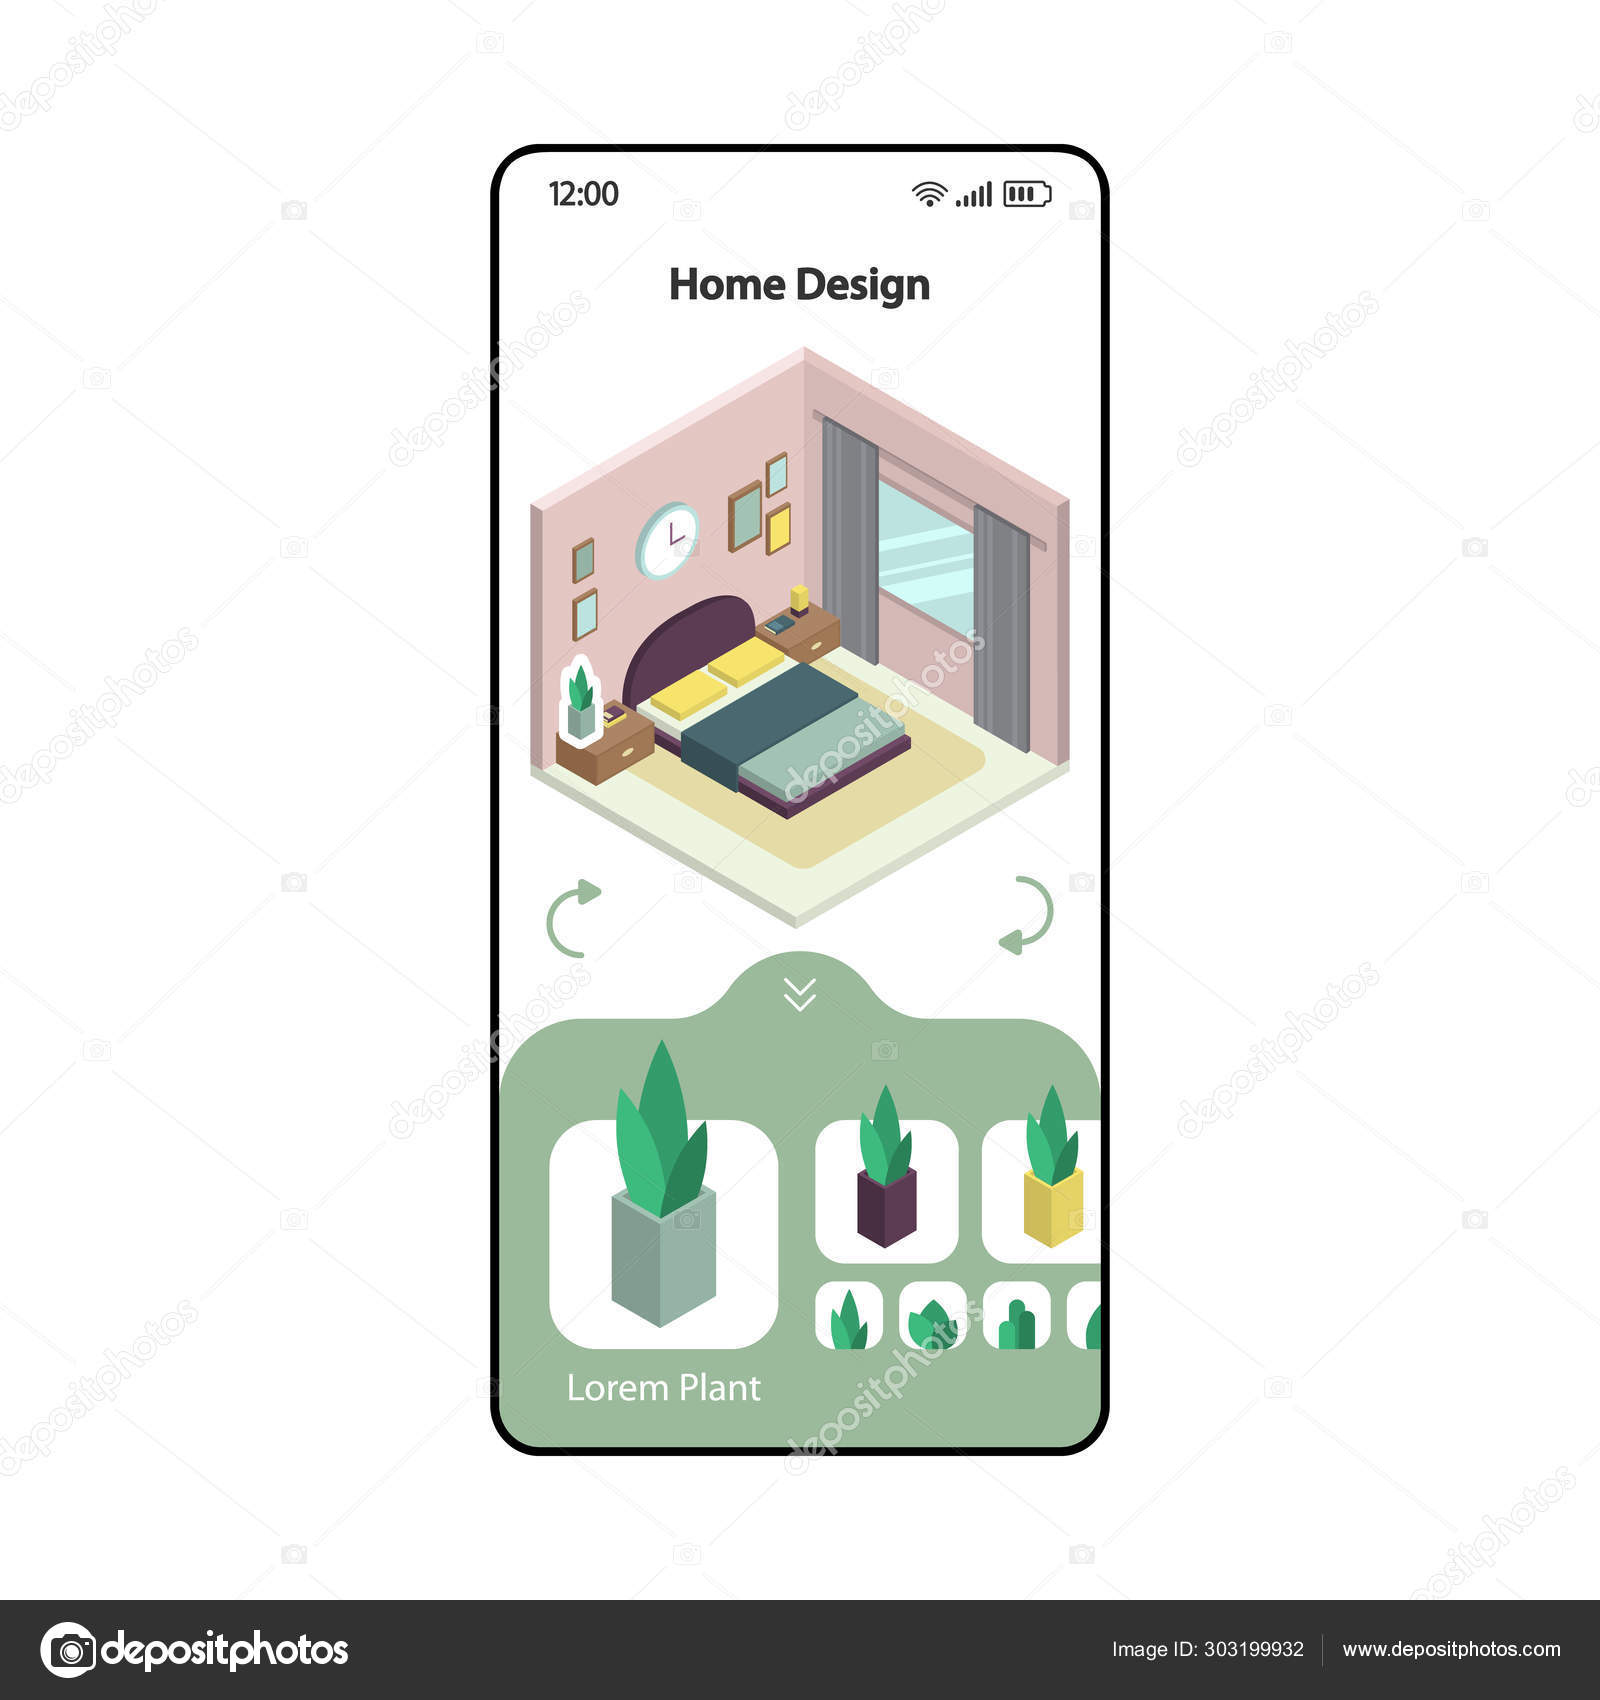 Home Design And Remodeling App Smartphone Interface Vector